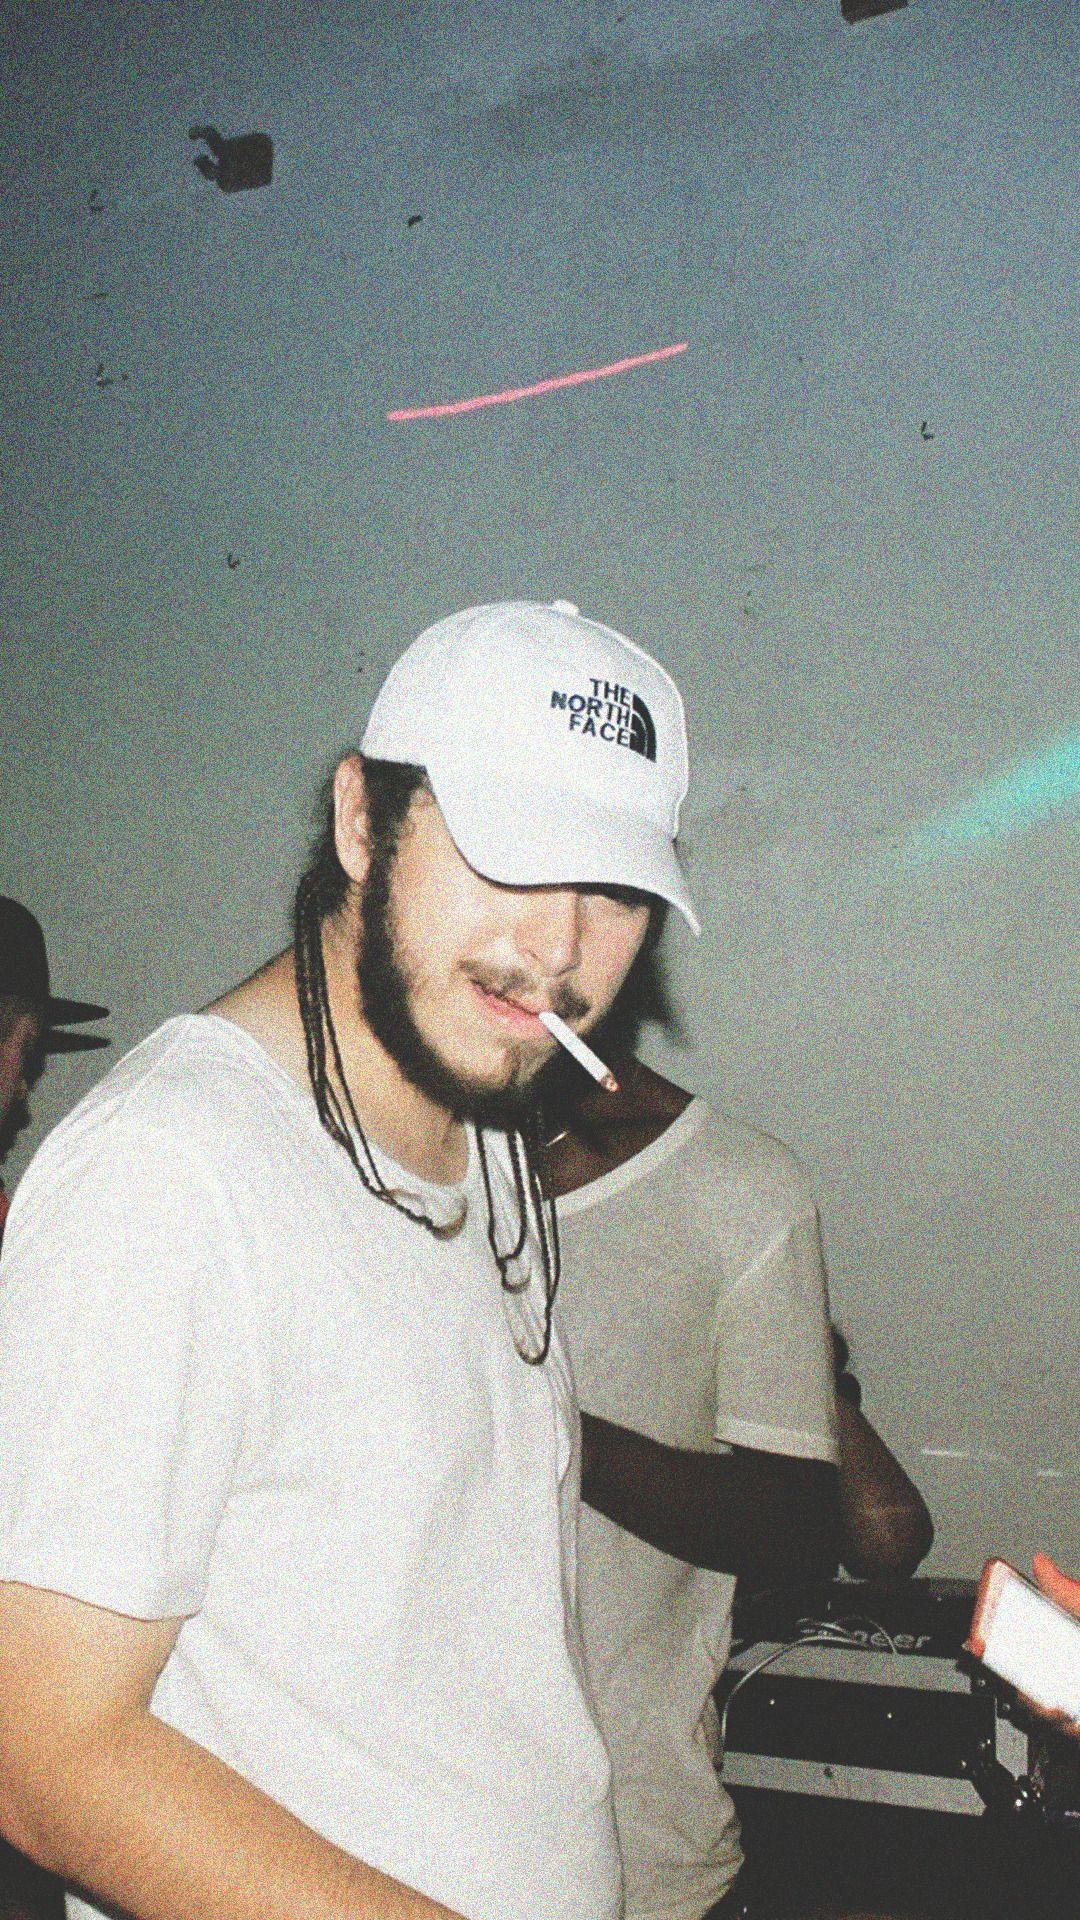 Post Malone Wallpapers - Wallpaper Cave